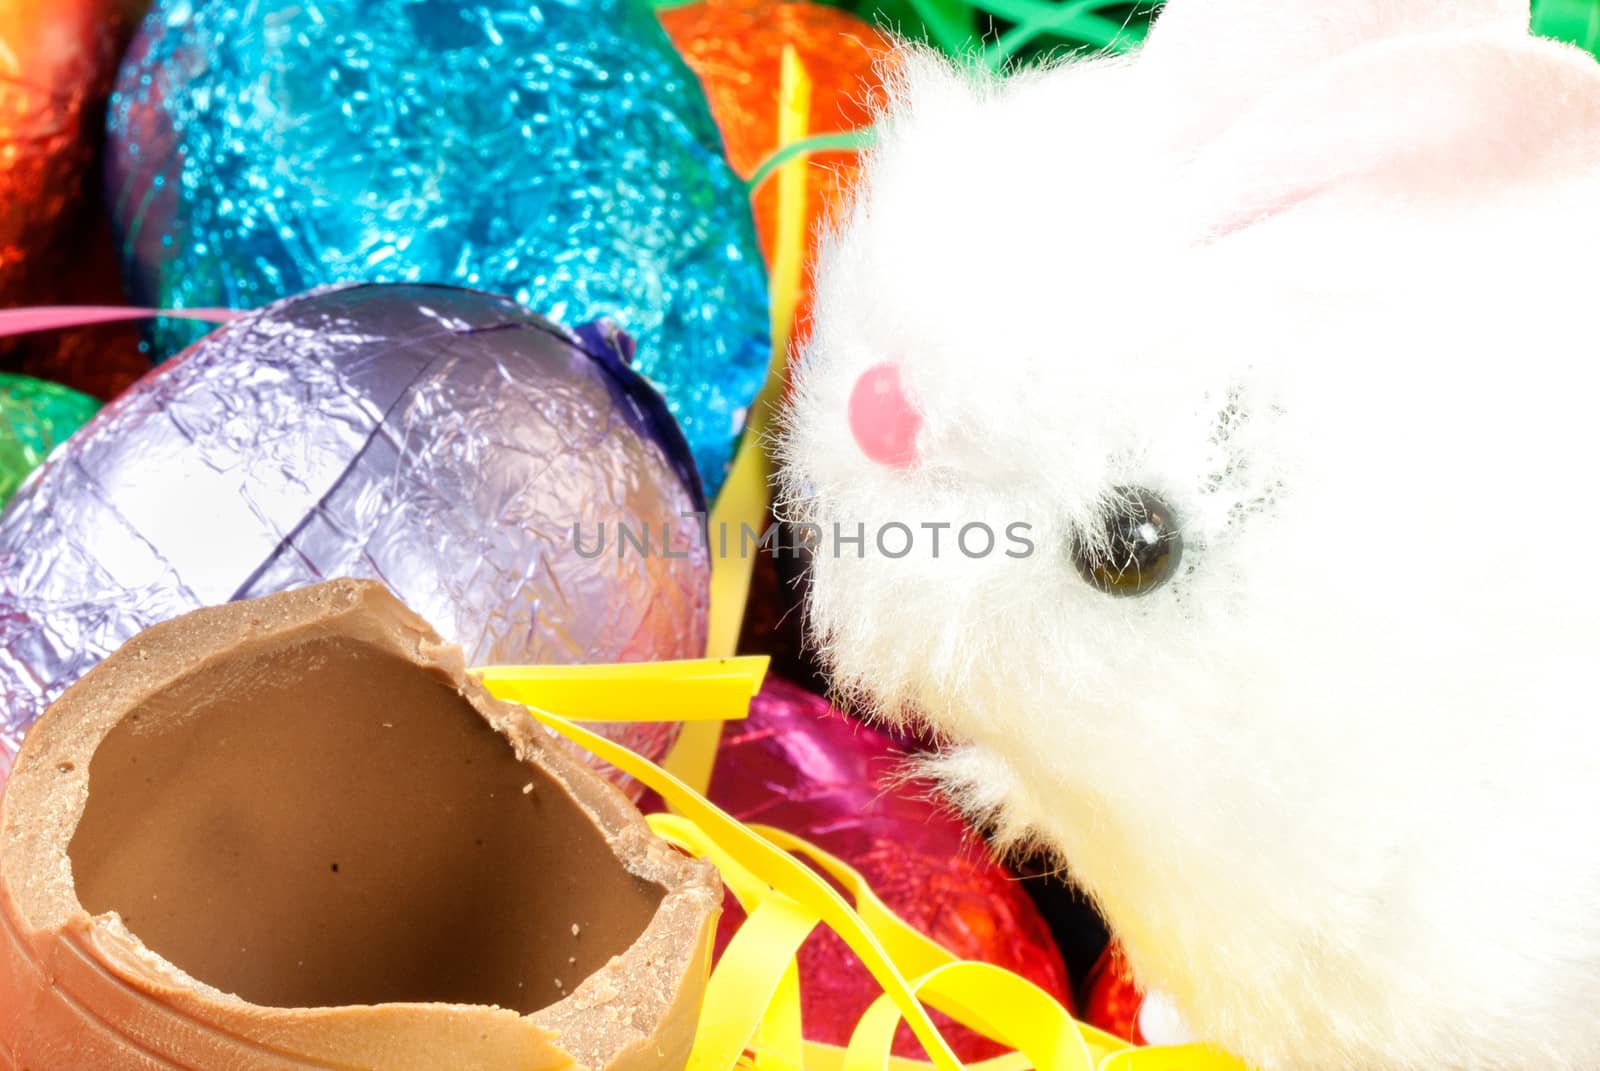 Close-up of a bunny toy eating a chocolate egg on an easter nest.